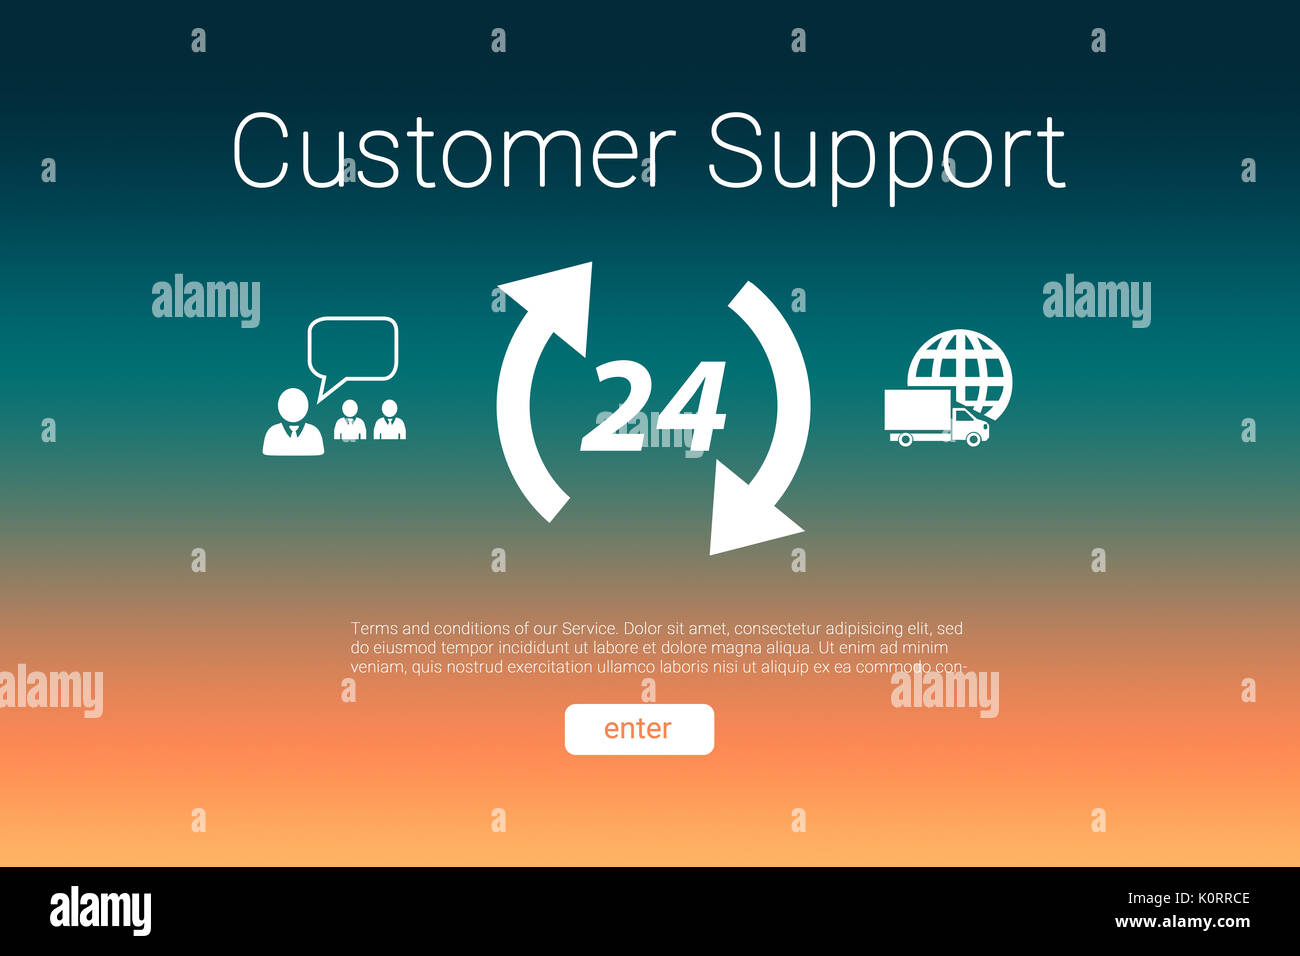 Icons and customer support text against turquoise and orange background Stock Photo